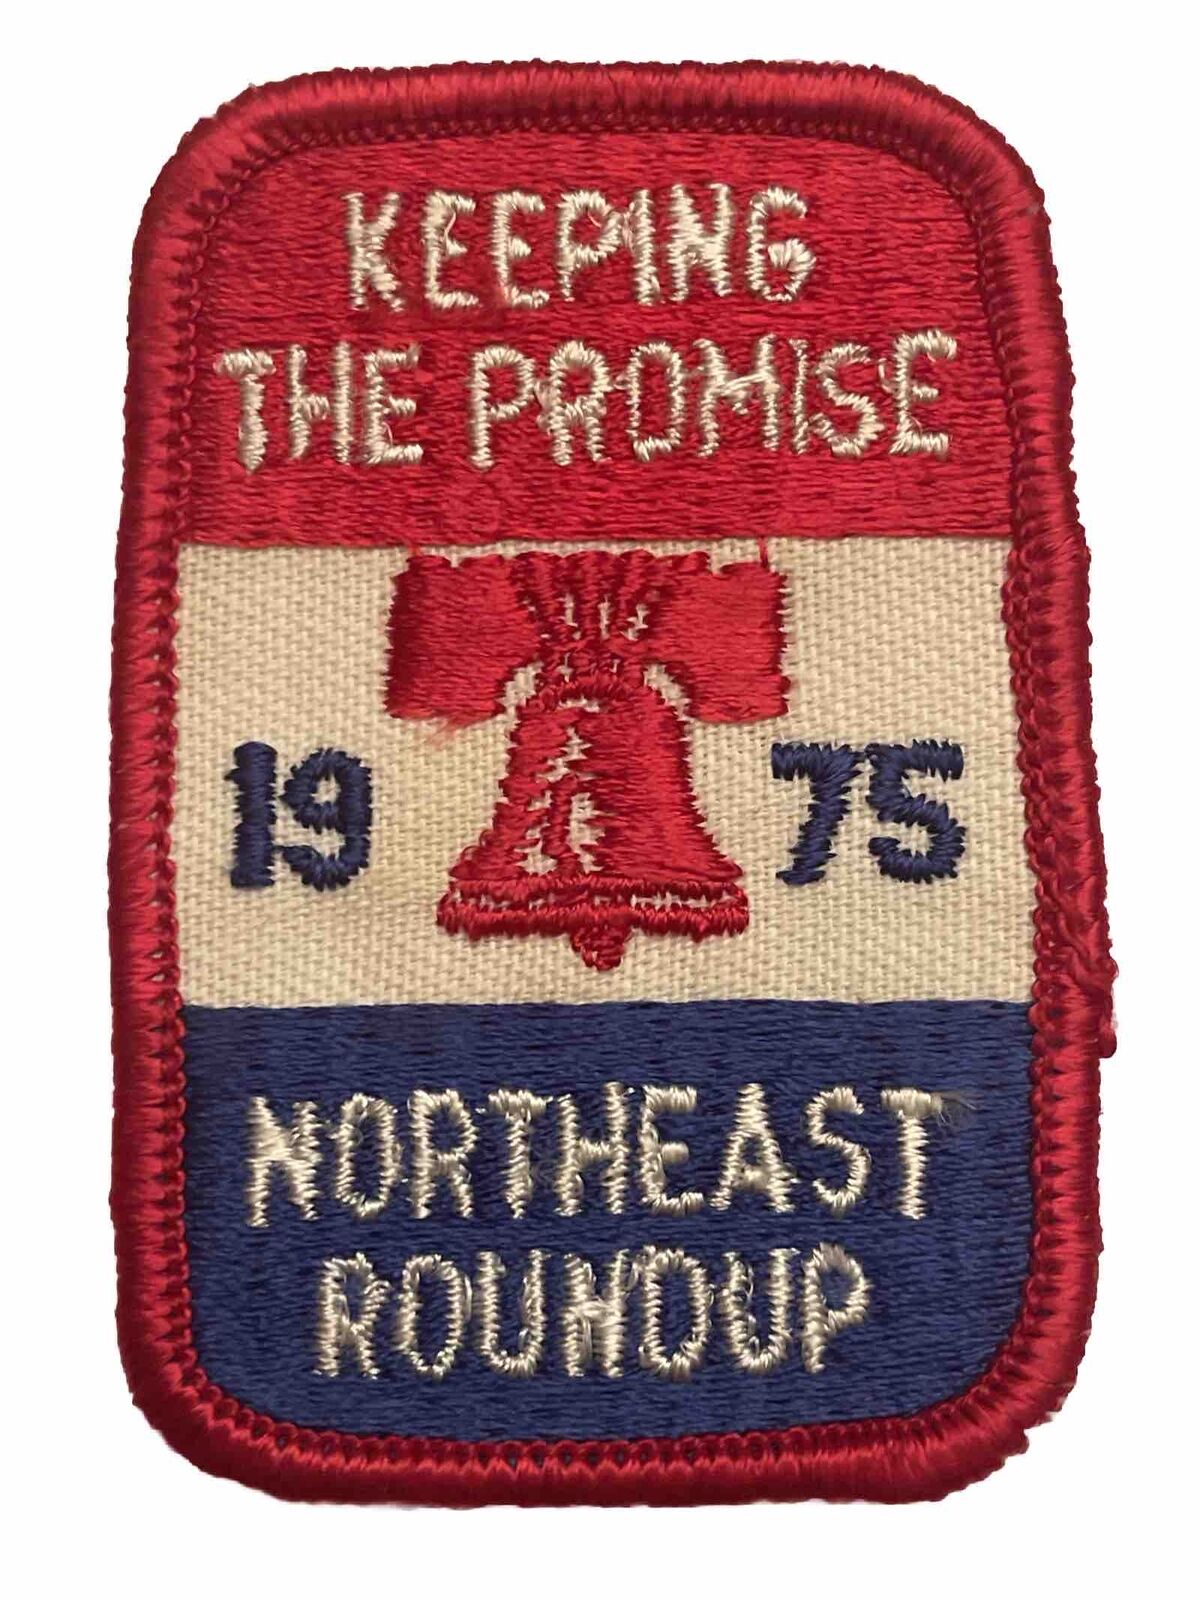 Northeast Roundup Patch 1975 Keeping The Promise BSA Boy Scouts Of America Vtg